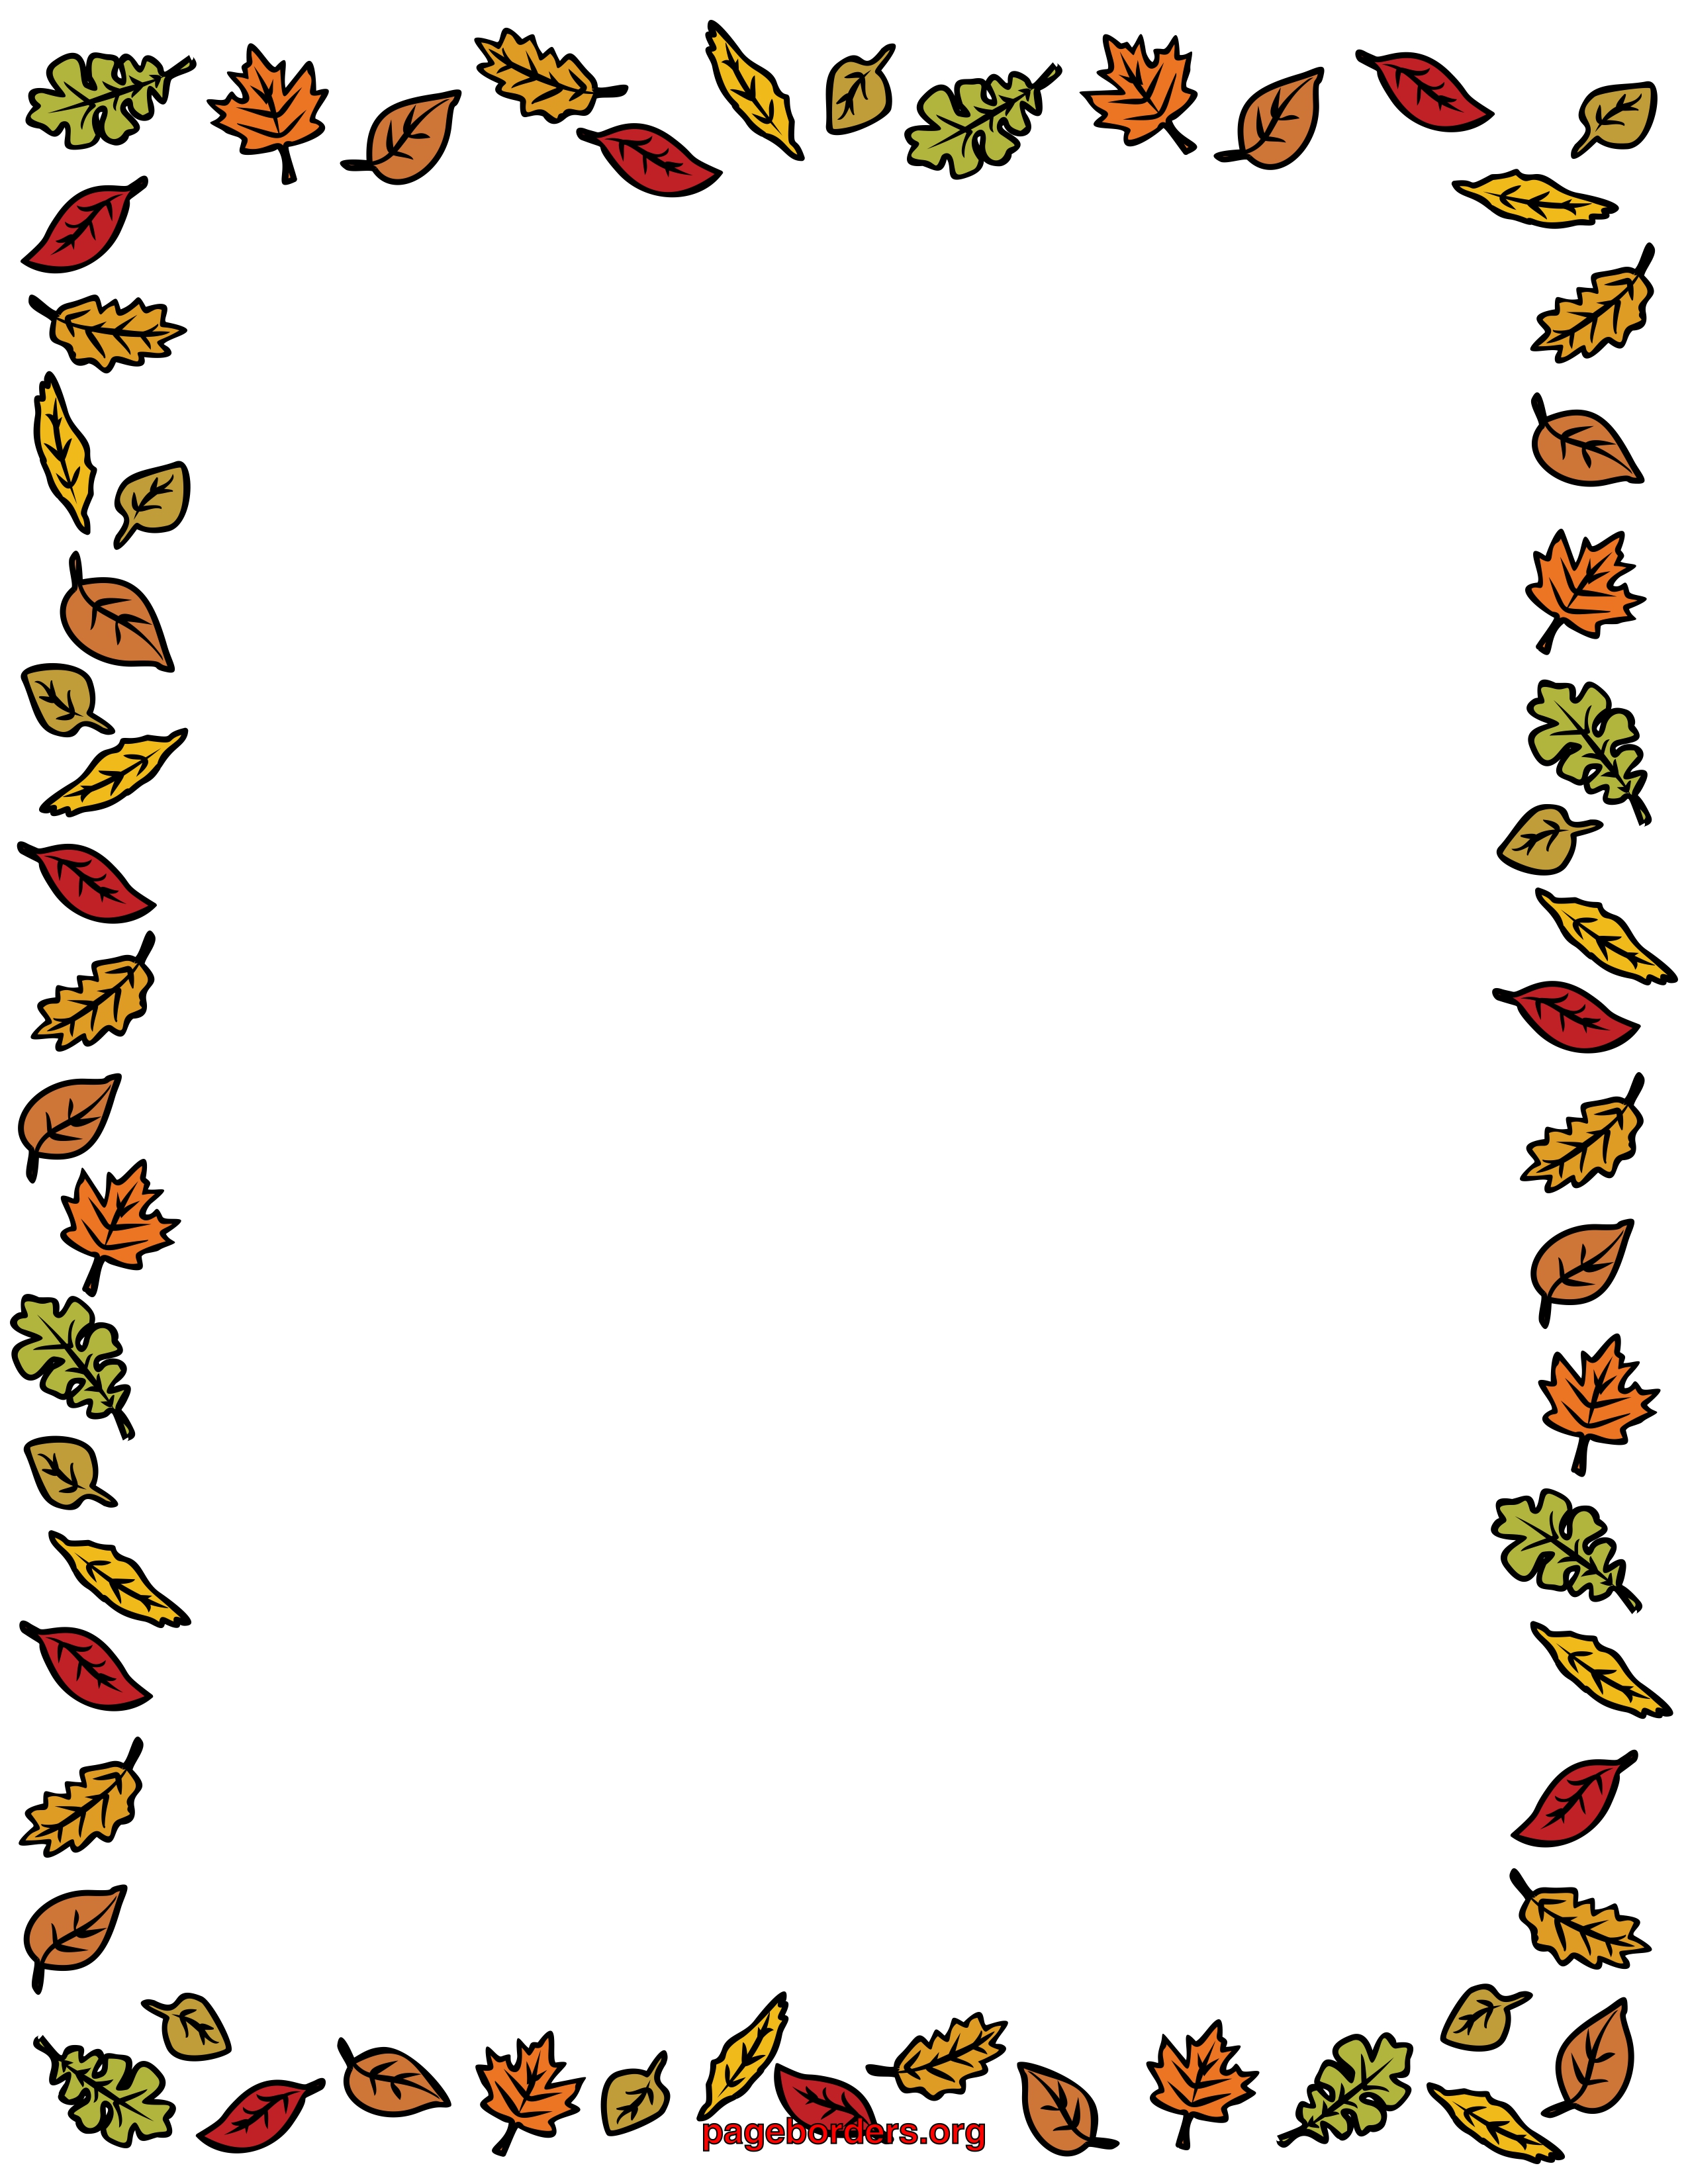 Clipart leaf borders